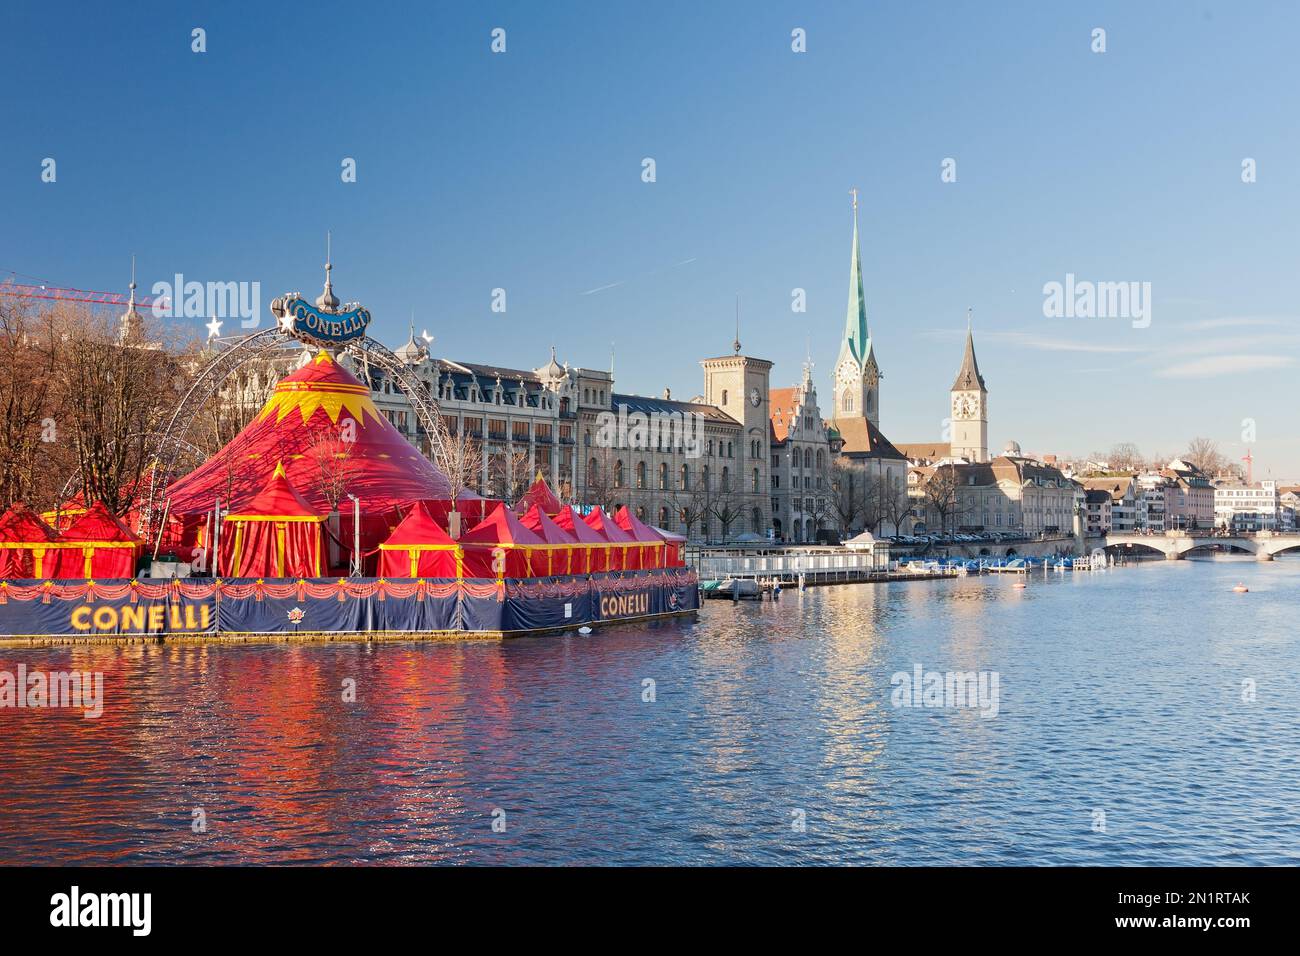 View from the Quai Bridge on the River Limmat with the Bauschänzli, Christmas circus Conelli, Zurich, Switzerand Stock Photo